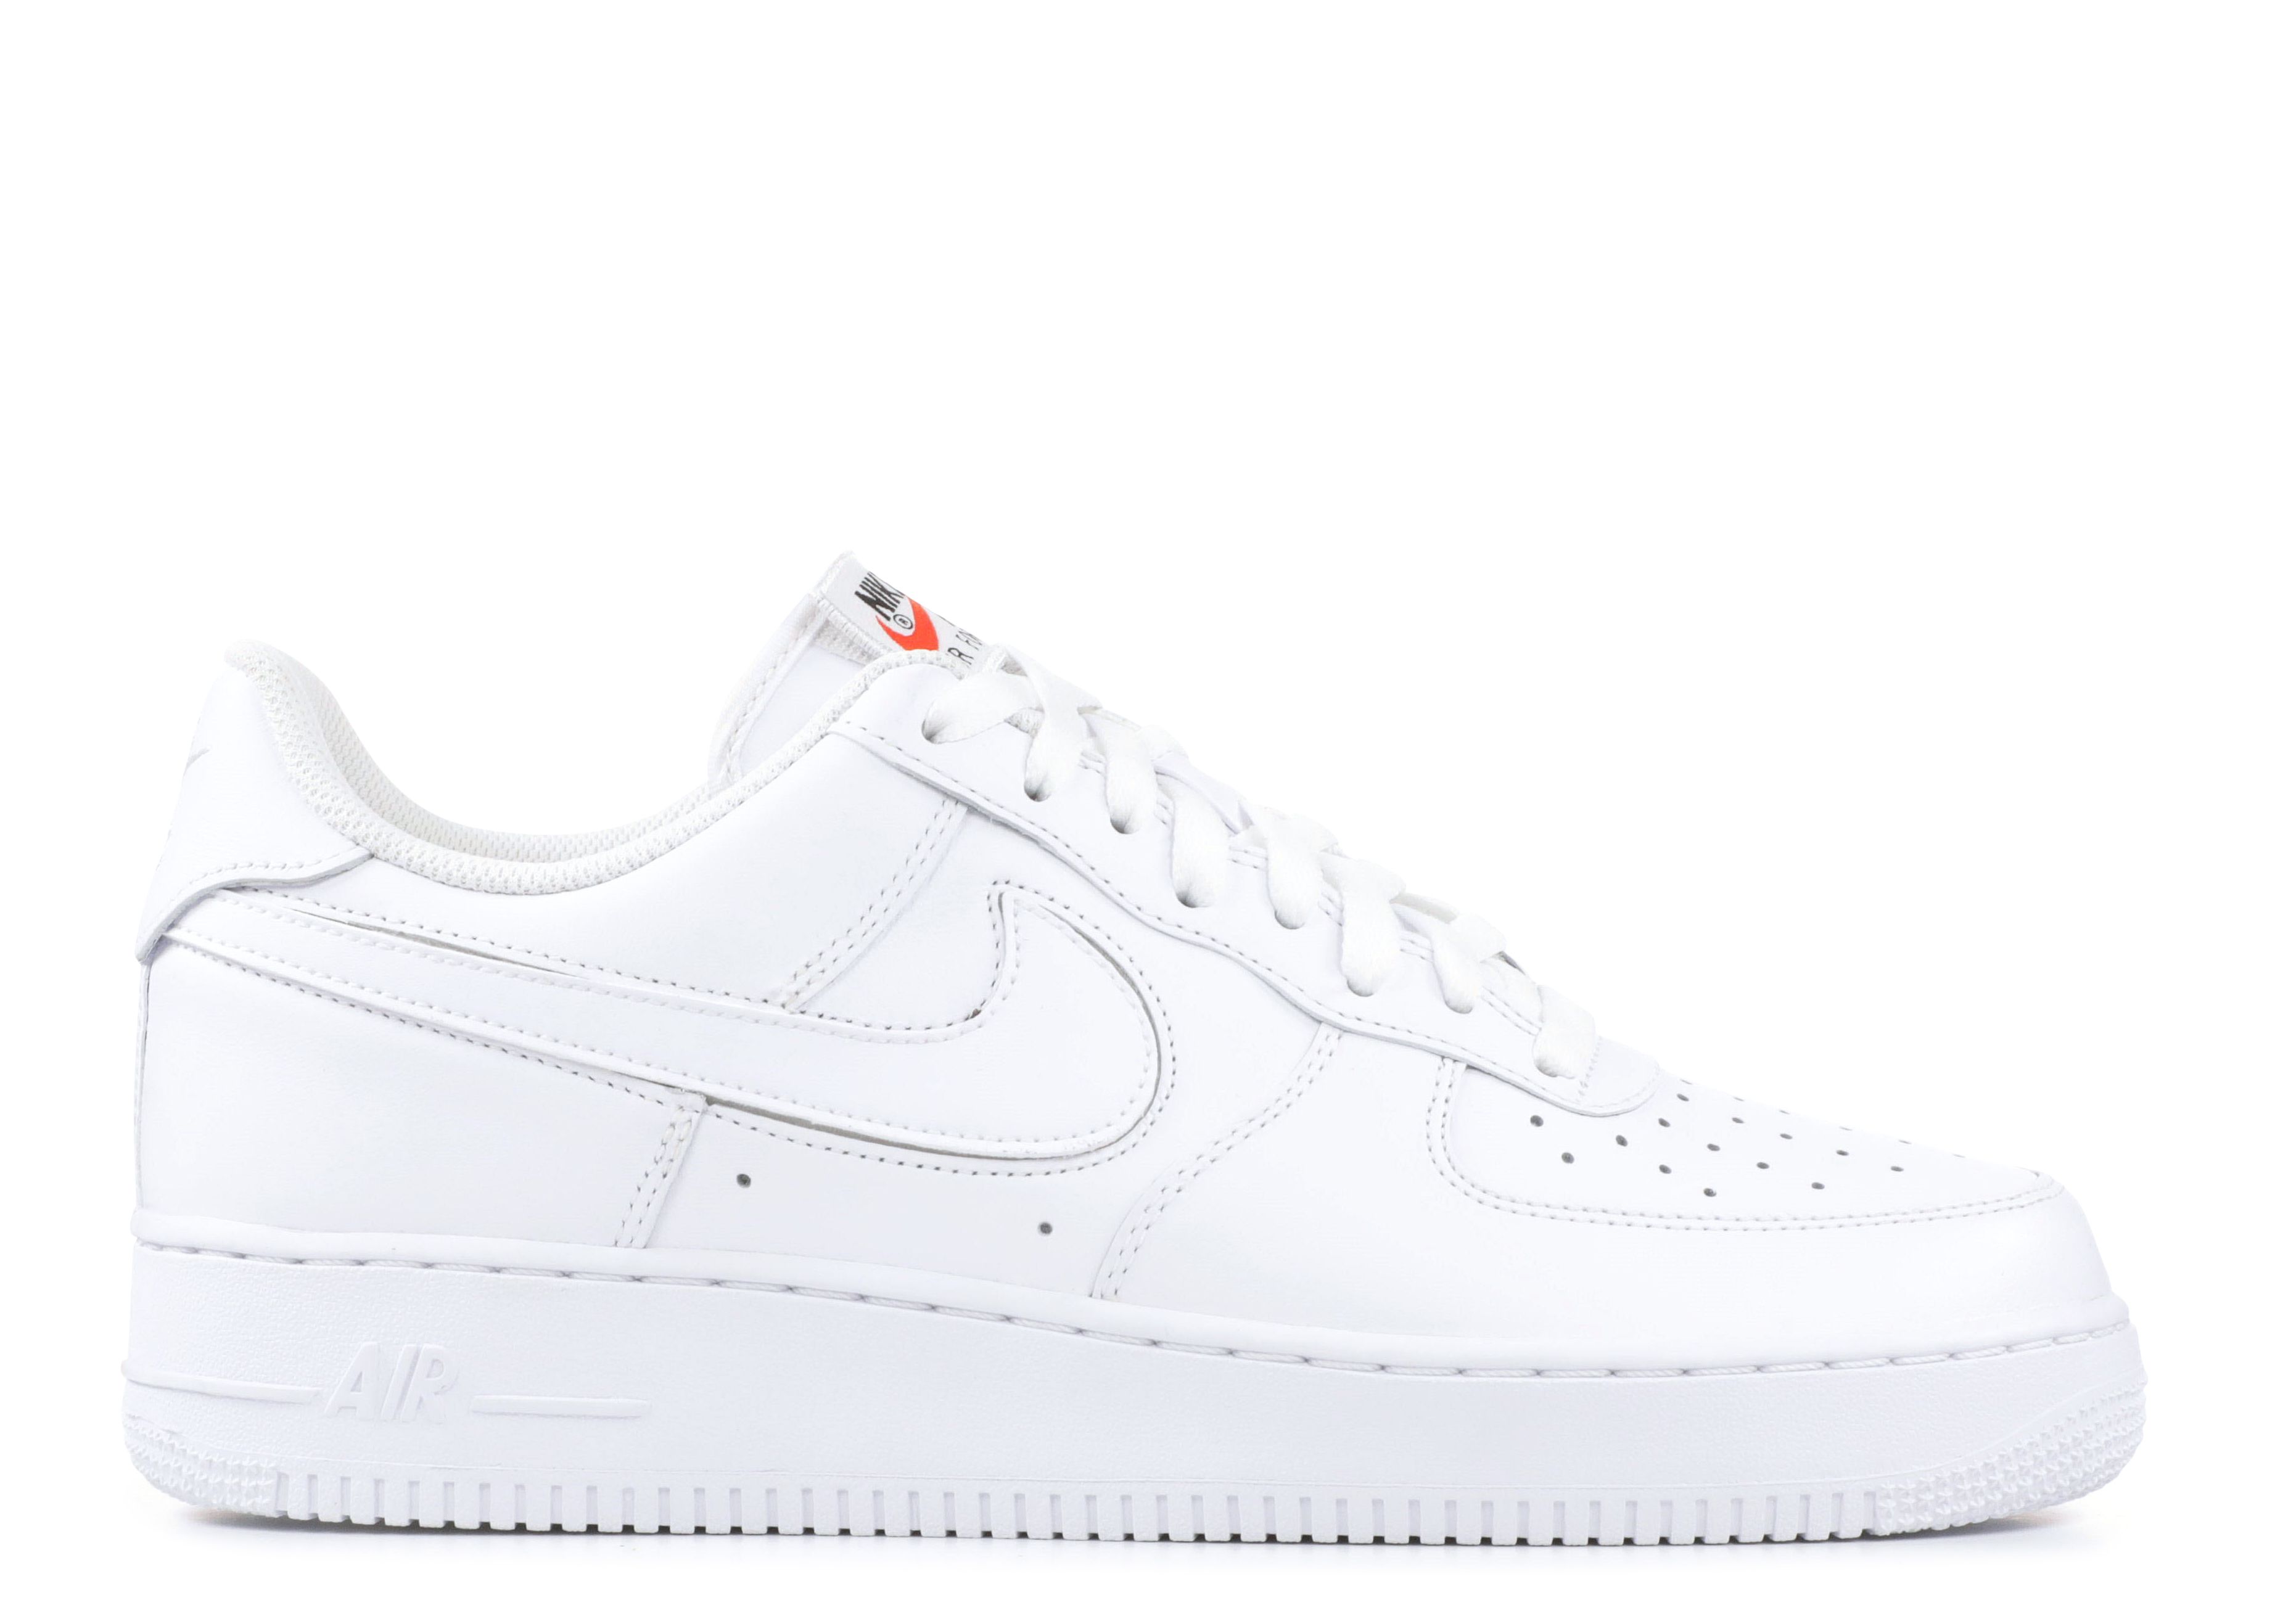 Кроссовки Nike Air Force 1 Low 'All Star - Swoosh Pack', белый original authentic nike air force 1 low mini swoosh men s skateboarding shoes sport outdoor sneakers 2018 new arrival 823511 603